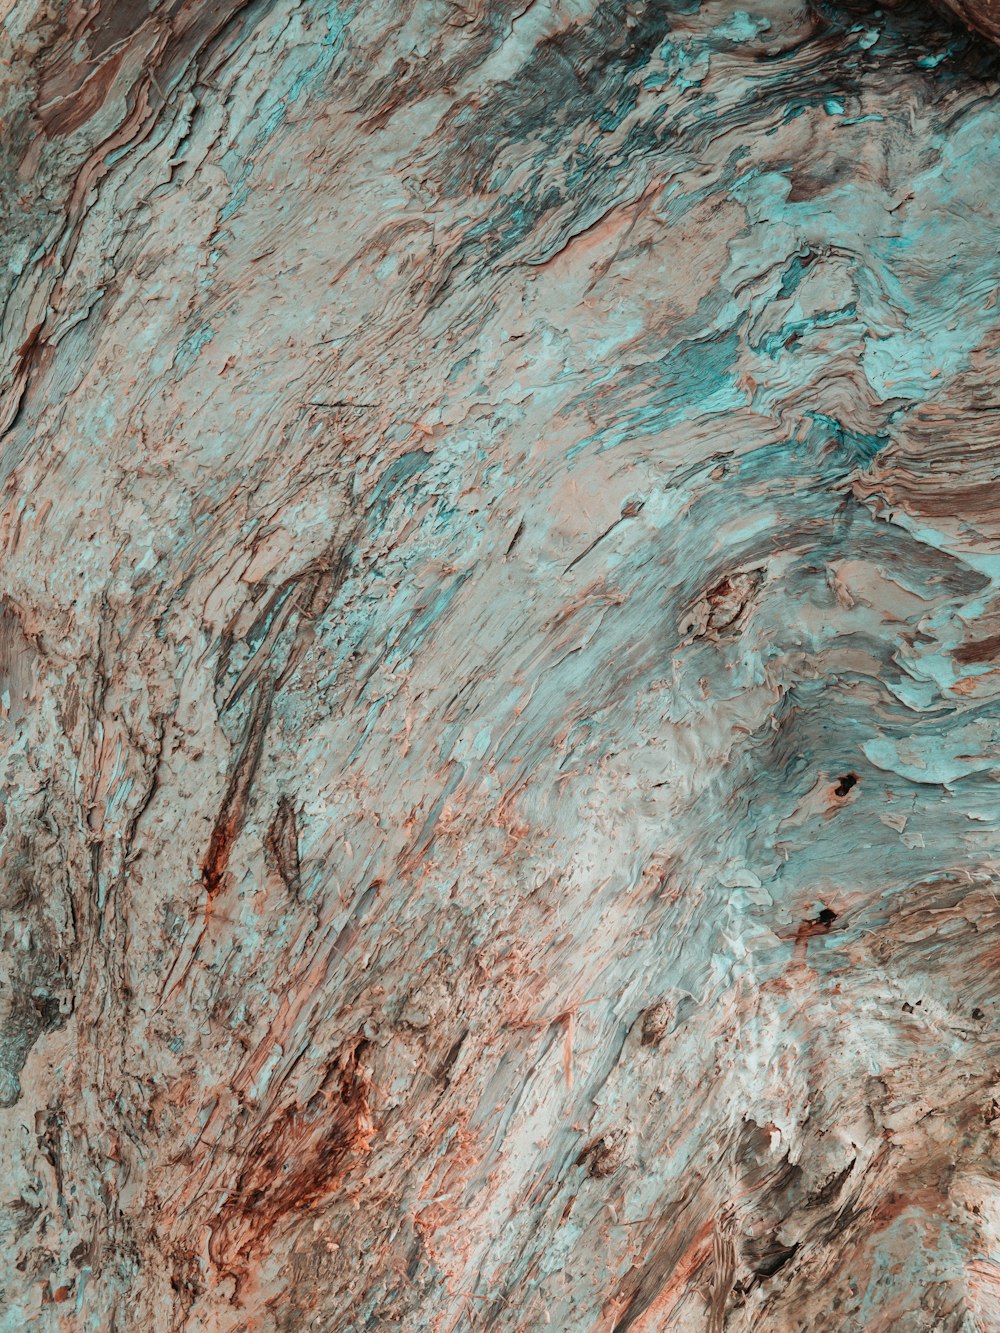 red and blue rock in closeup photo